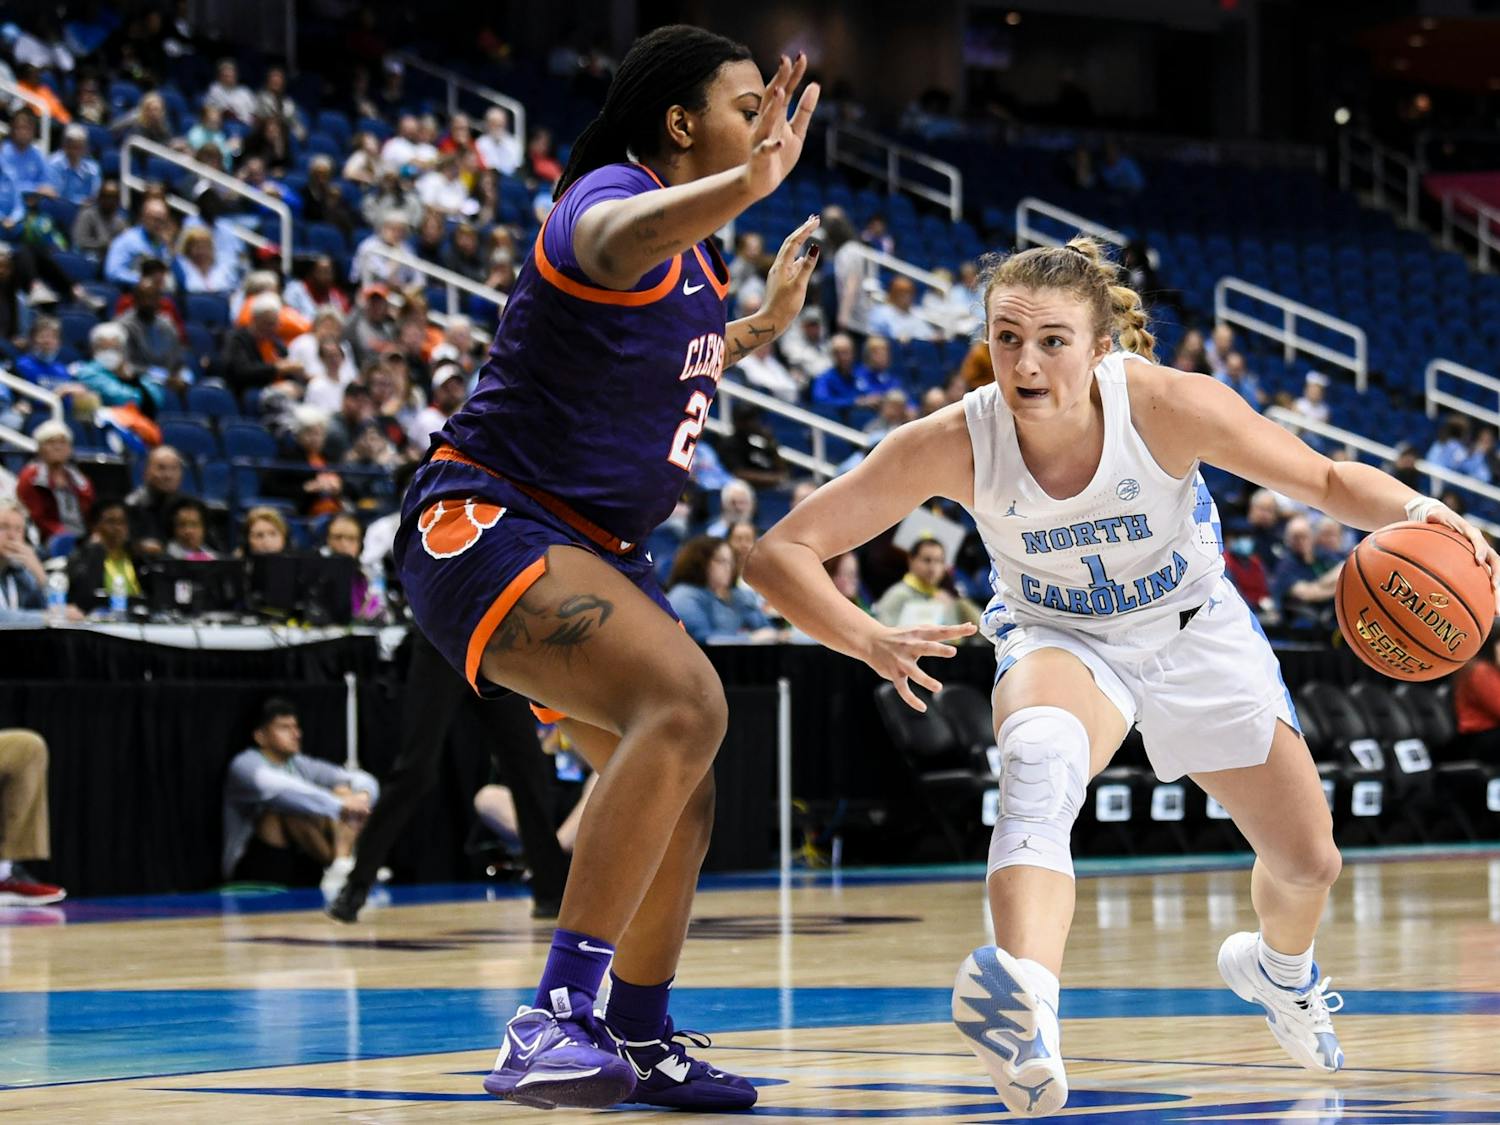 Junior guard and forward Alyssa Utsby (1) drives the ball to the basket in the game against Clemson University in the second round of ACC Championship in Greensboro, N.C. UNC won 68-58.